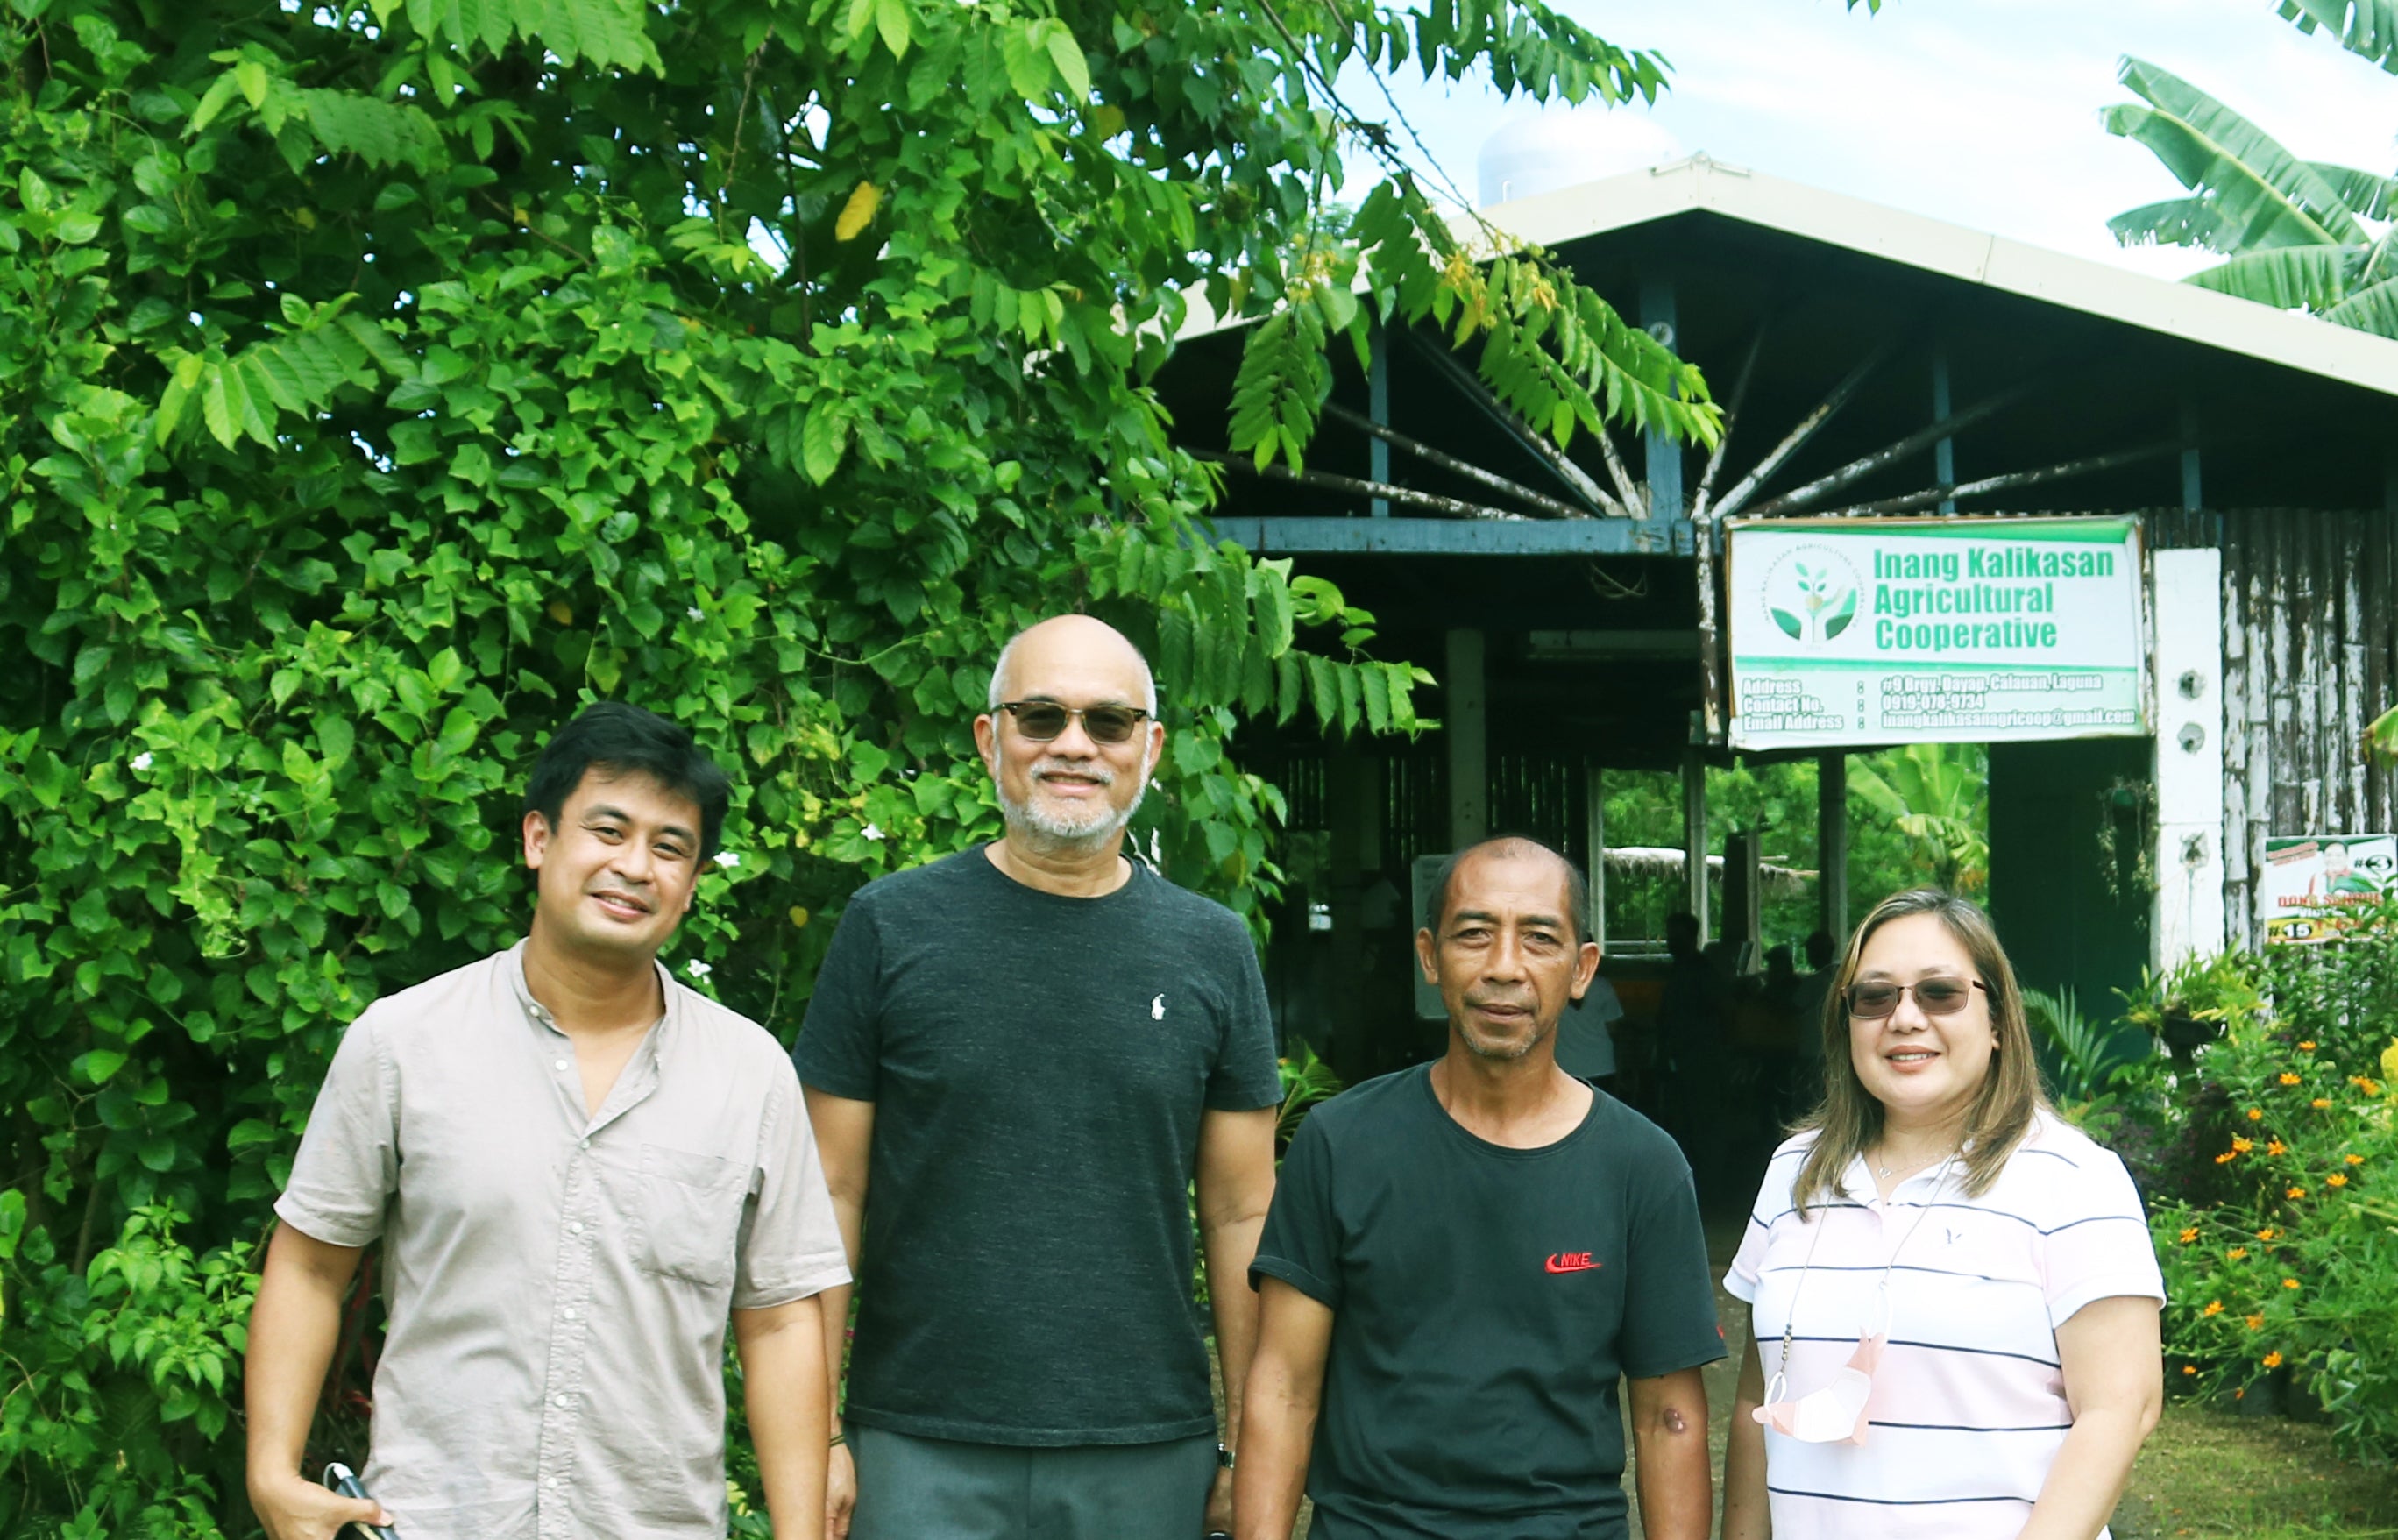 From Left: Jamir Ocampo (CEO and Founder of Tsaa Laya),Steve Benitez (CEO and Founder or Bo's Coffee), Sam (IKAC Farmer), and Rachel Fallarme (COO of Bo's Coffee). Taken last June 23, 2022 during Tsaa Laya immersion.